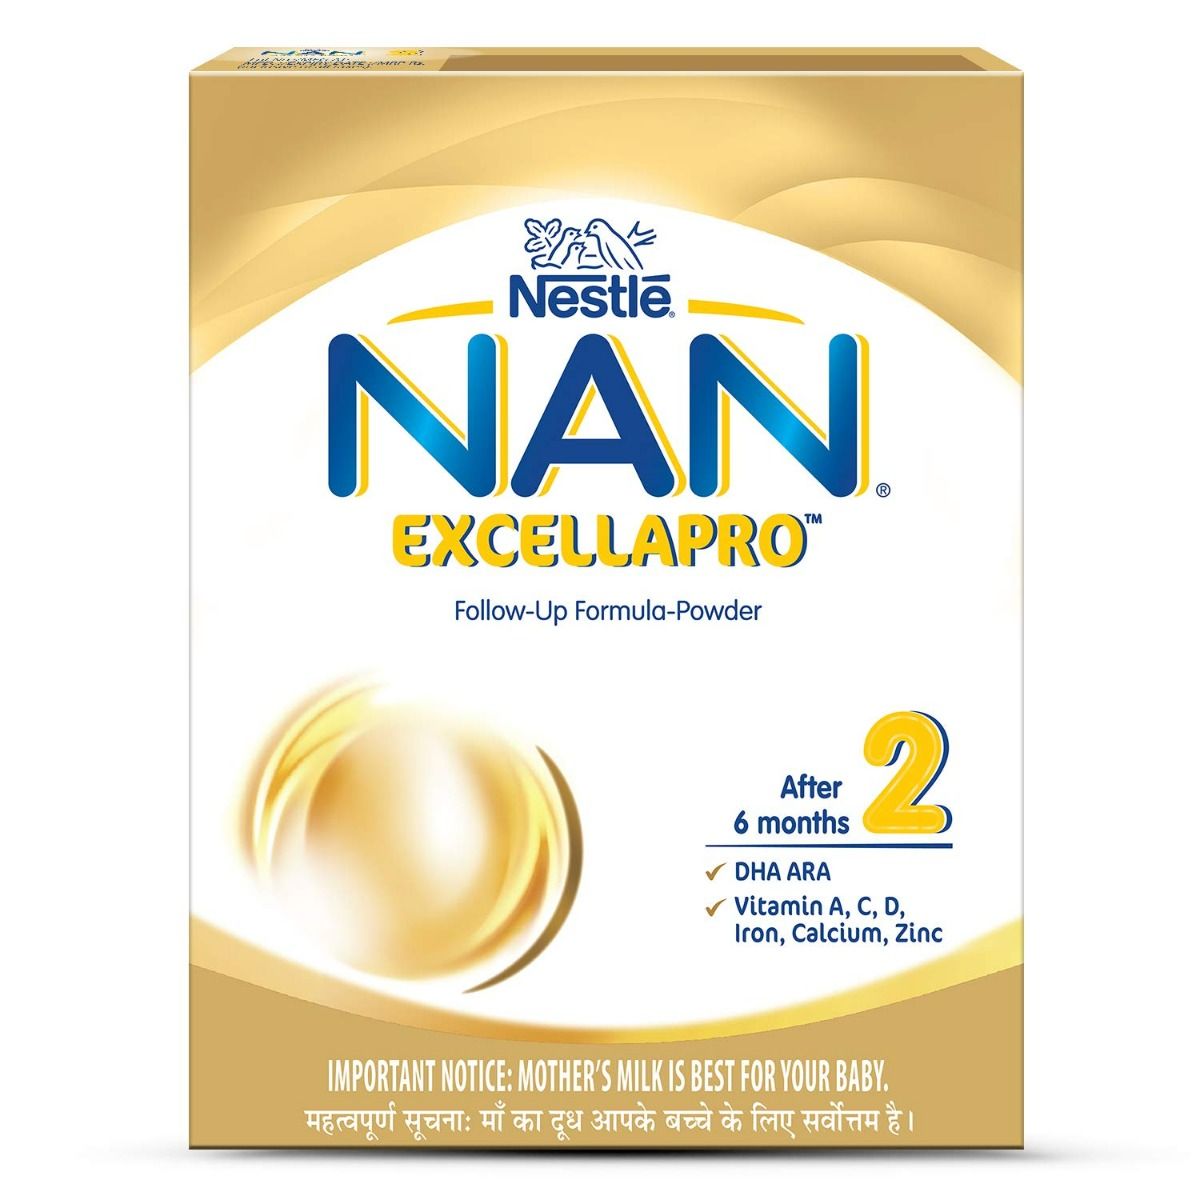 Nestle Nan Excellapro Follow-Up Formula, Stage 2, After 6 months, 400 gm Refill Pack, Pack of 1 